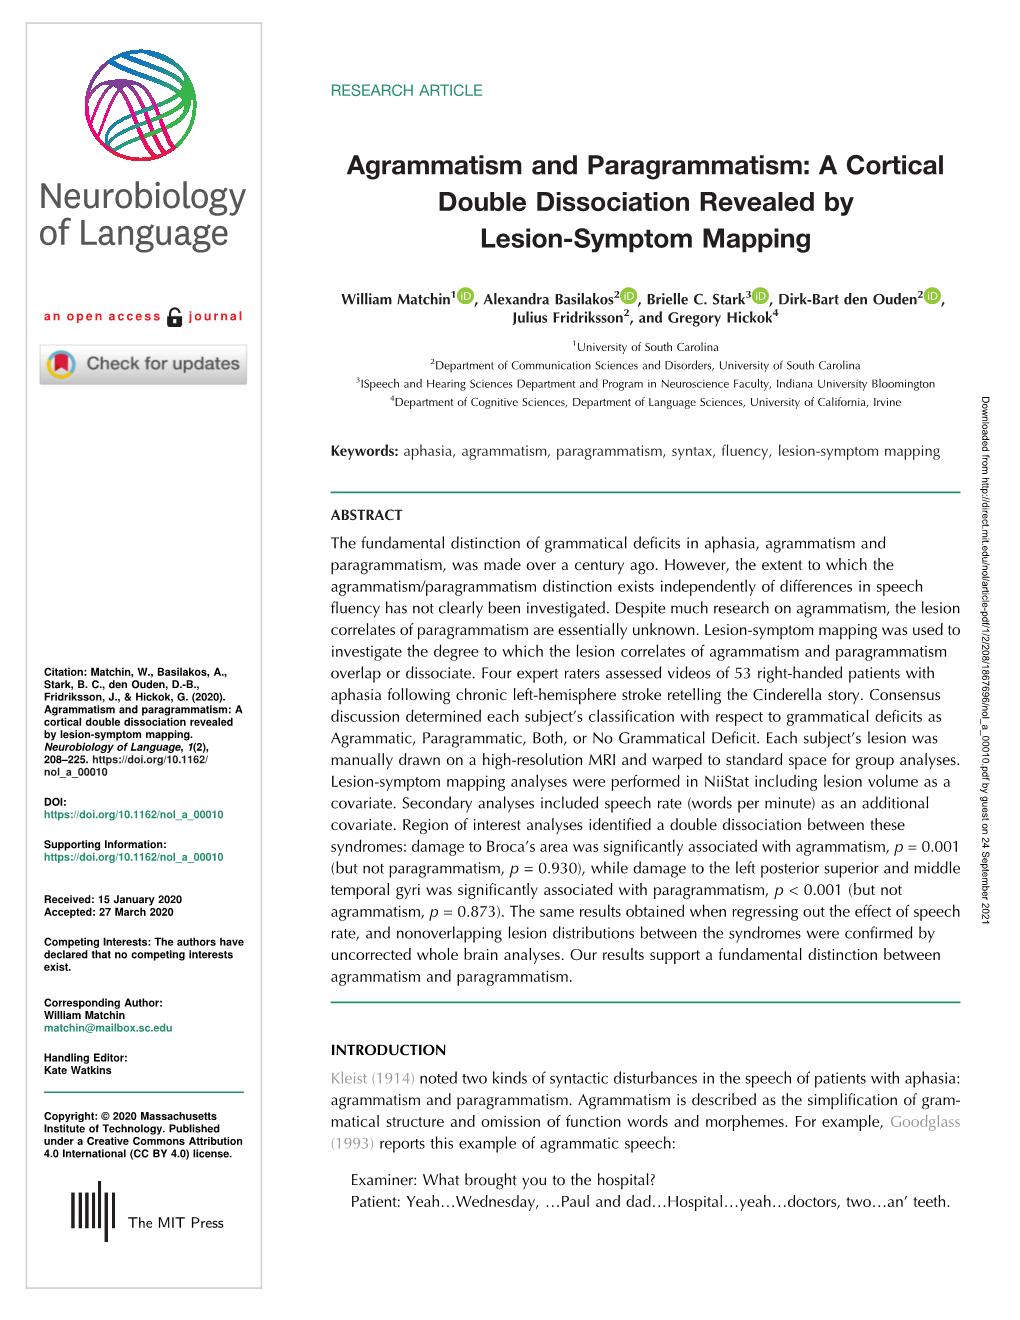 Agrammatism and Paragrammatism: a Cortical Double Dissociation Revealed by Lesion-Symptom Mapping